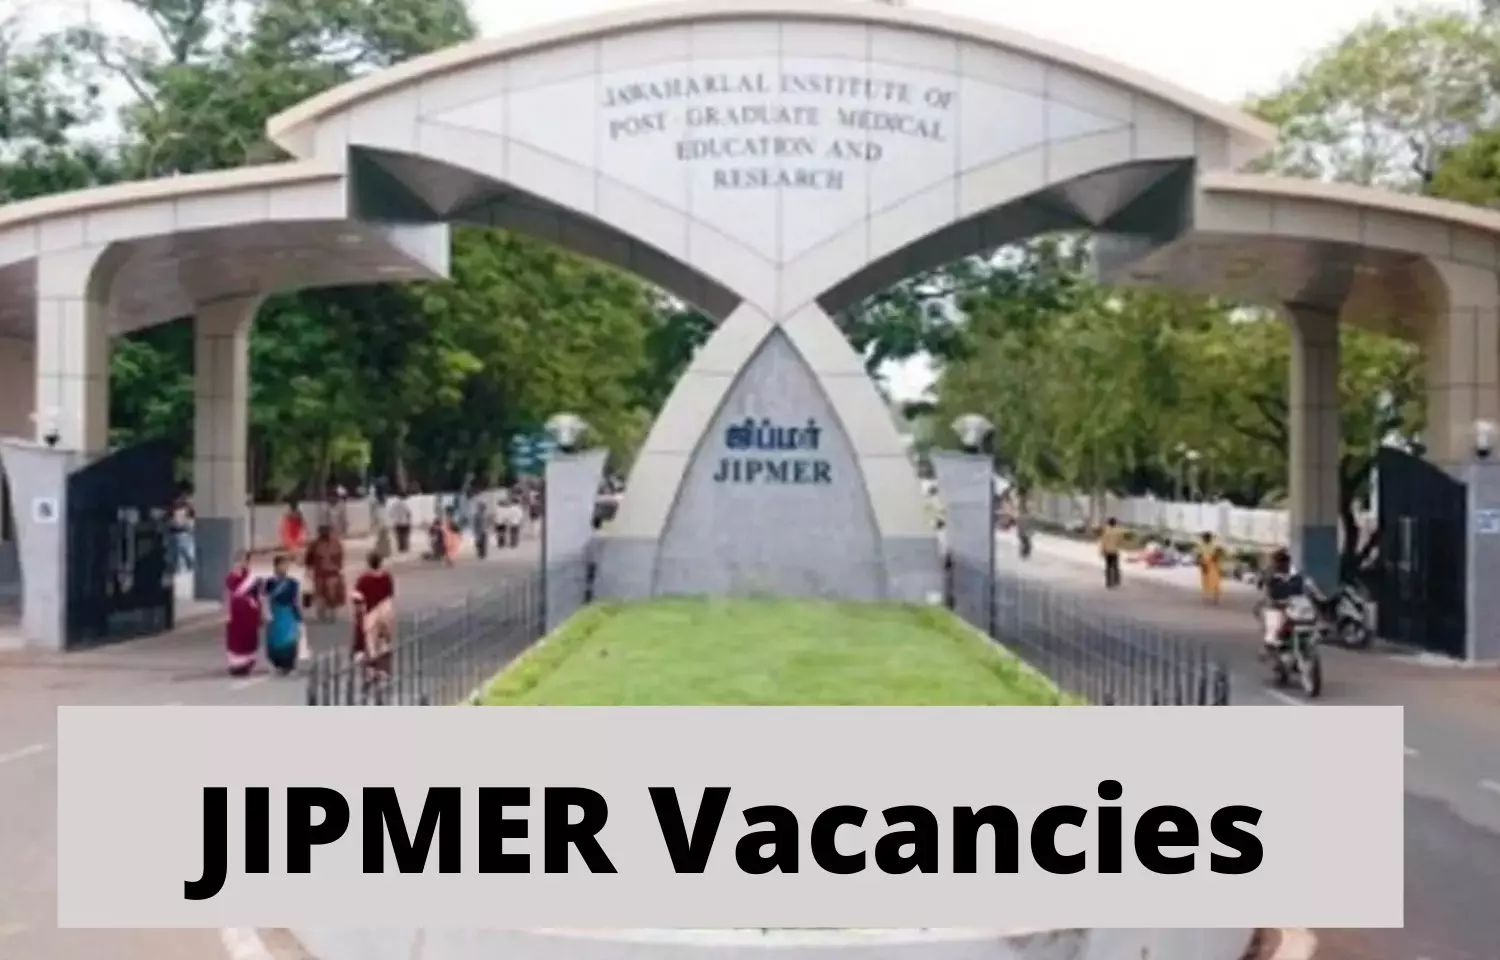 APPLY NOW At JIPMER Puducherry for Junior Resident post Vacancies, Details